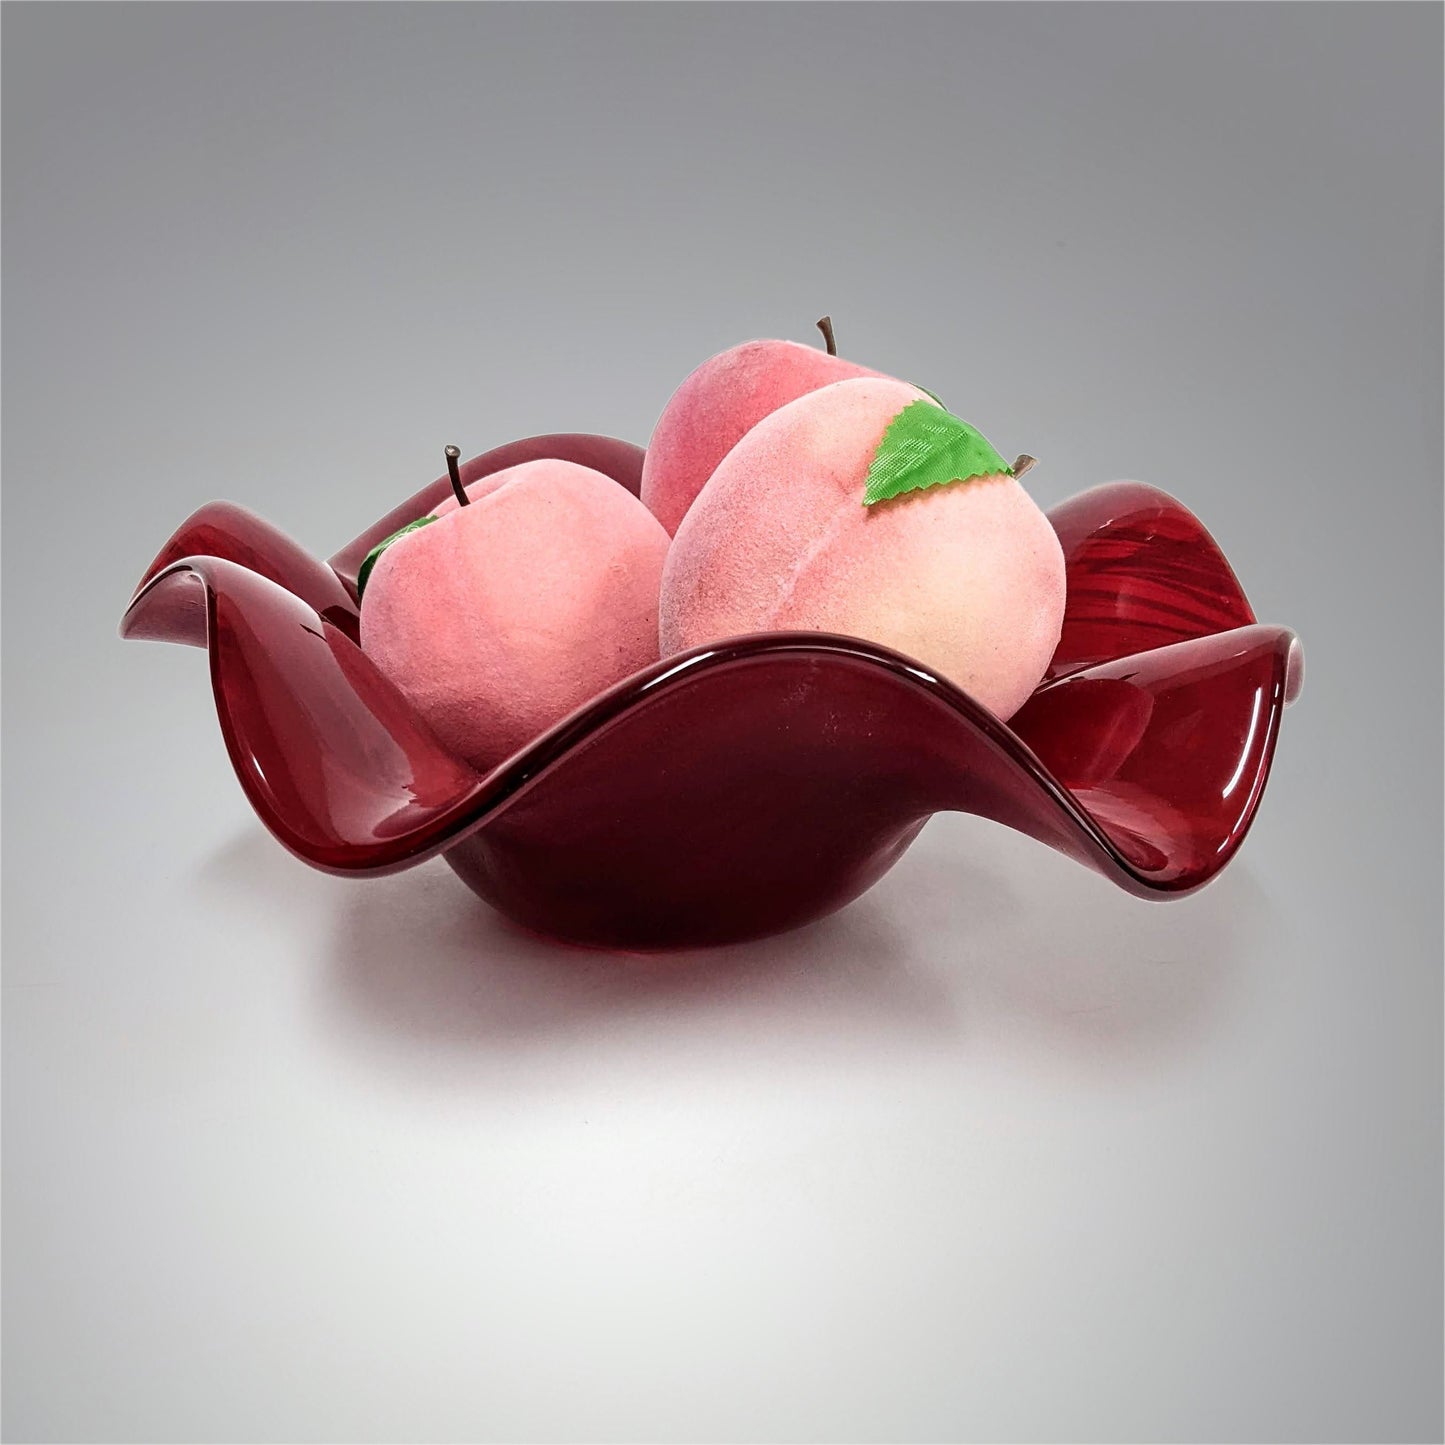 Deep Ruby Red Glass Art Wave Bowl | 40th Anniversary Gift Ideas